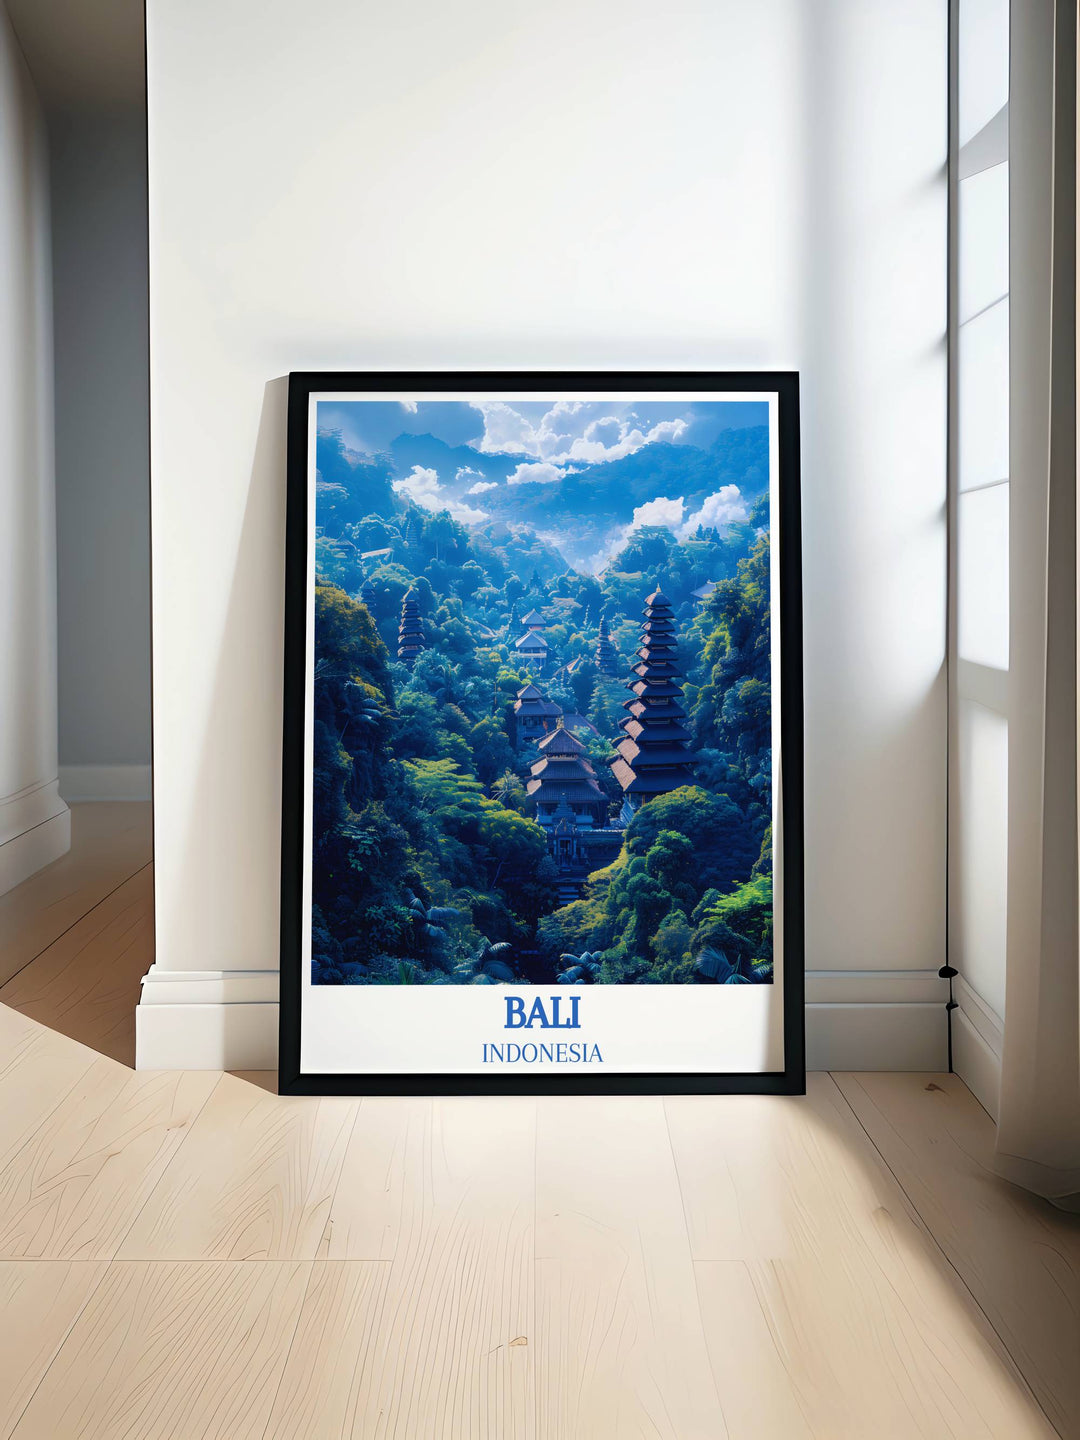 Artistic representation of Balis Ubud Monkey Forest, designed to bring the serenity and beauty of Indonesian wildlife into your living space.